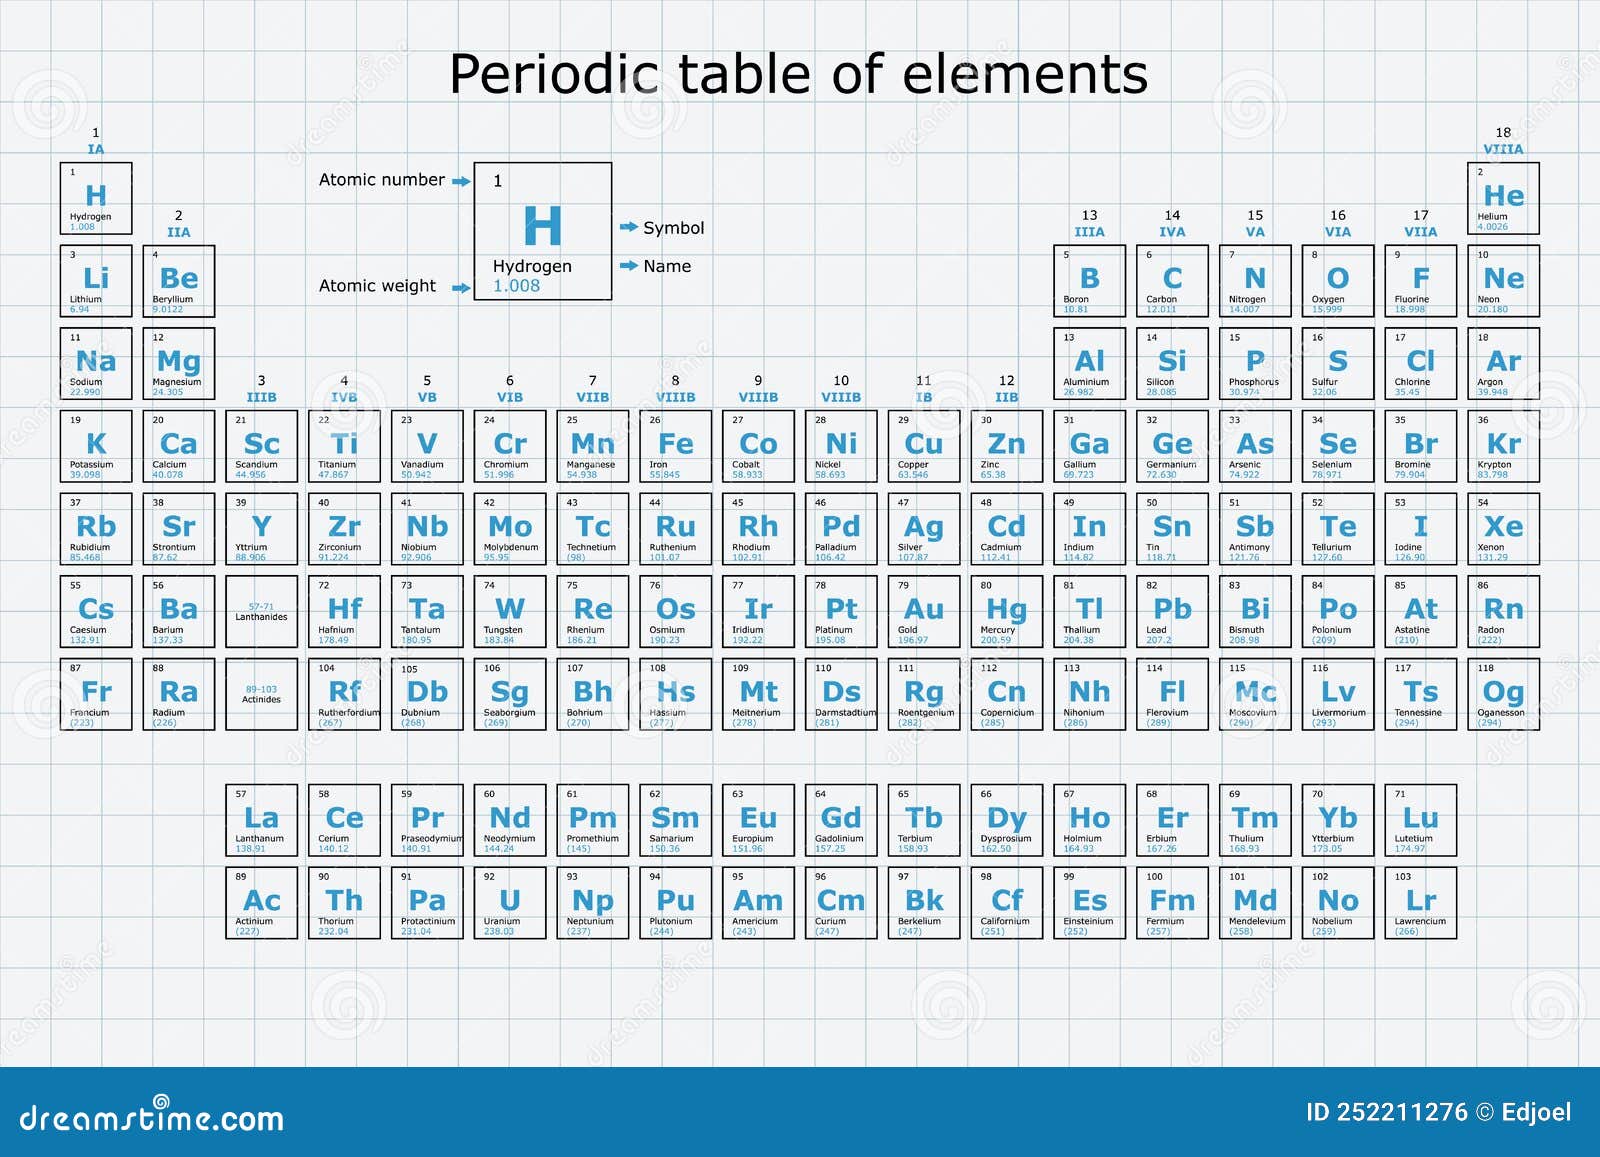 Lit element. Атомные номера. Chemical elements with Atomic number and symbols.